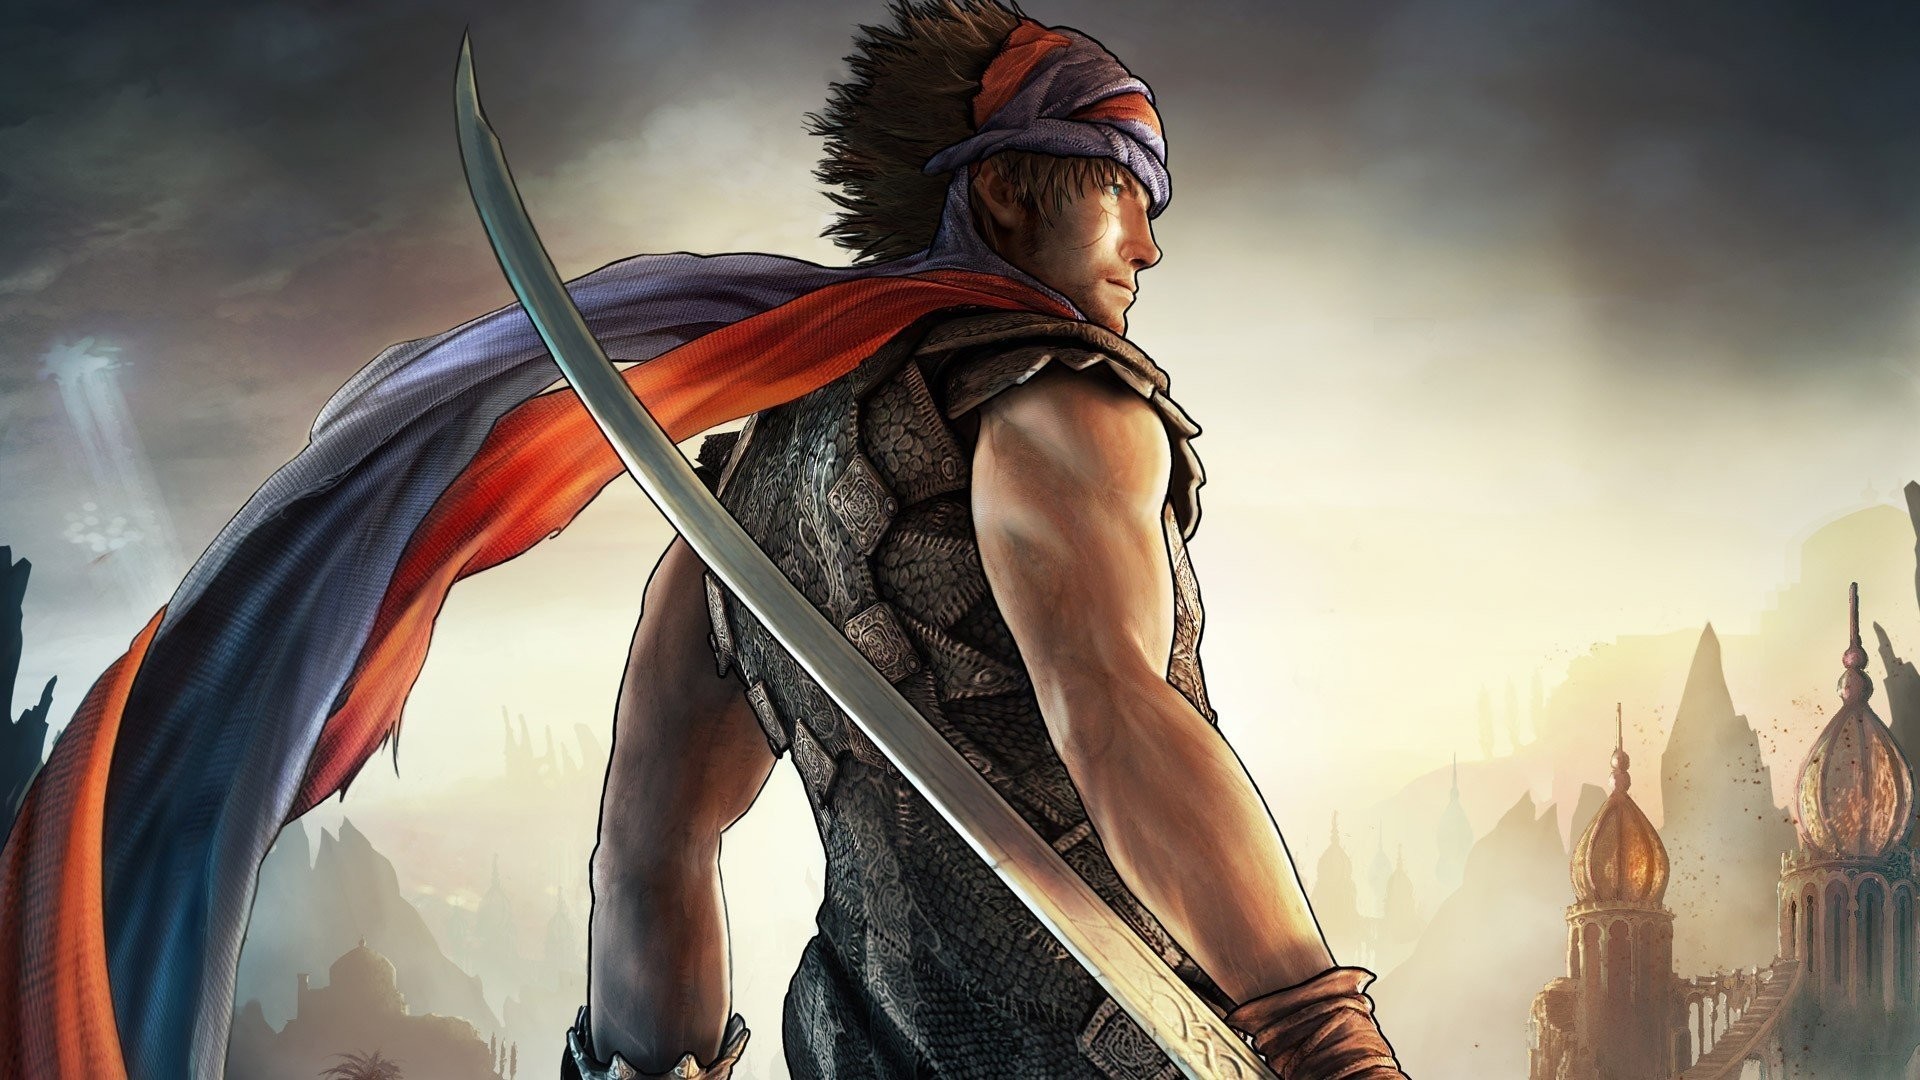 1920x1080 Which is the best Prince of Persia photo or wallpaper? Quora 1920Ã1080  Prince